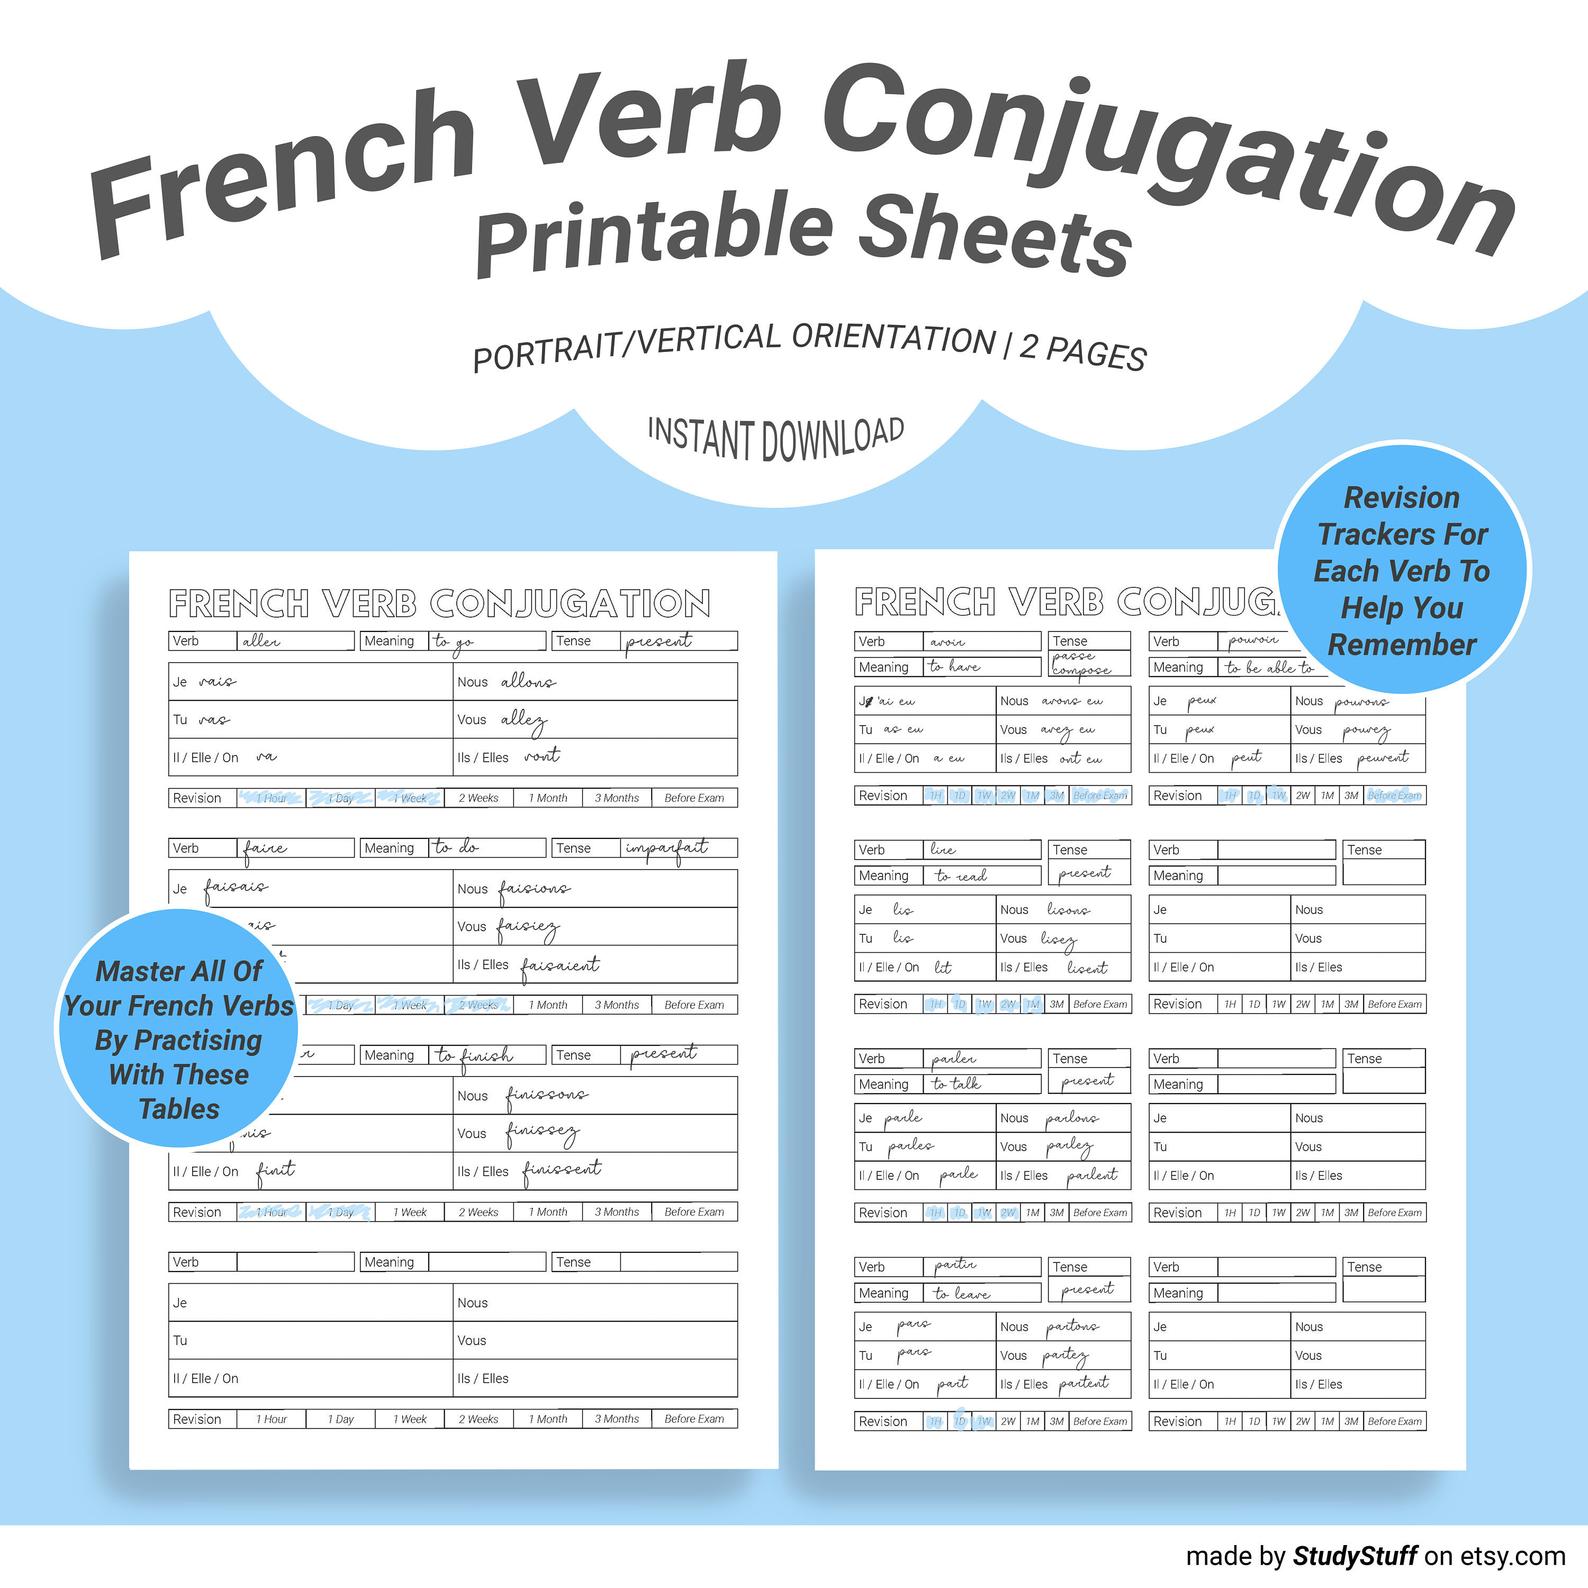 A french verb conjugation worksheet is a printable pdf document that featur...